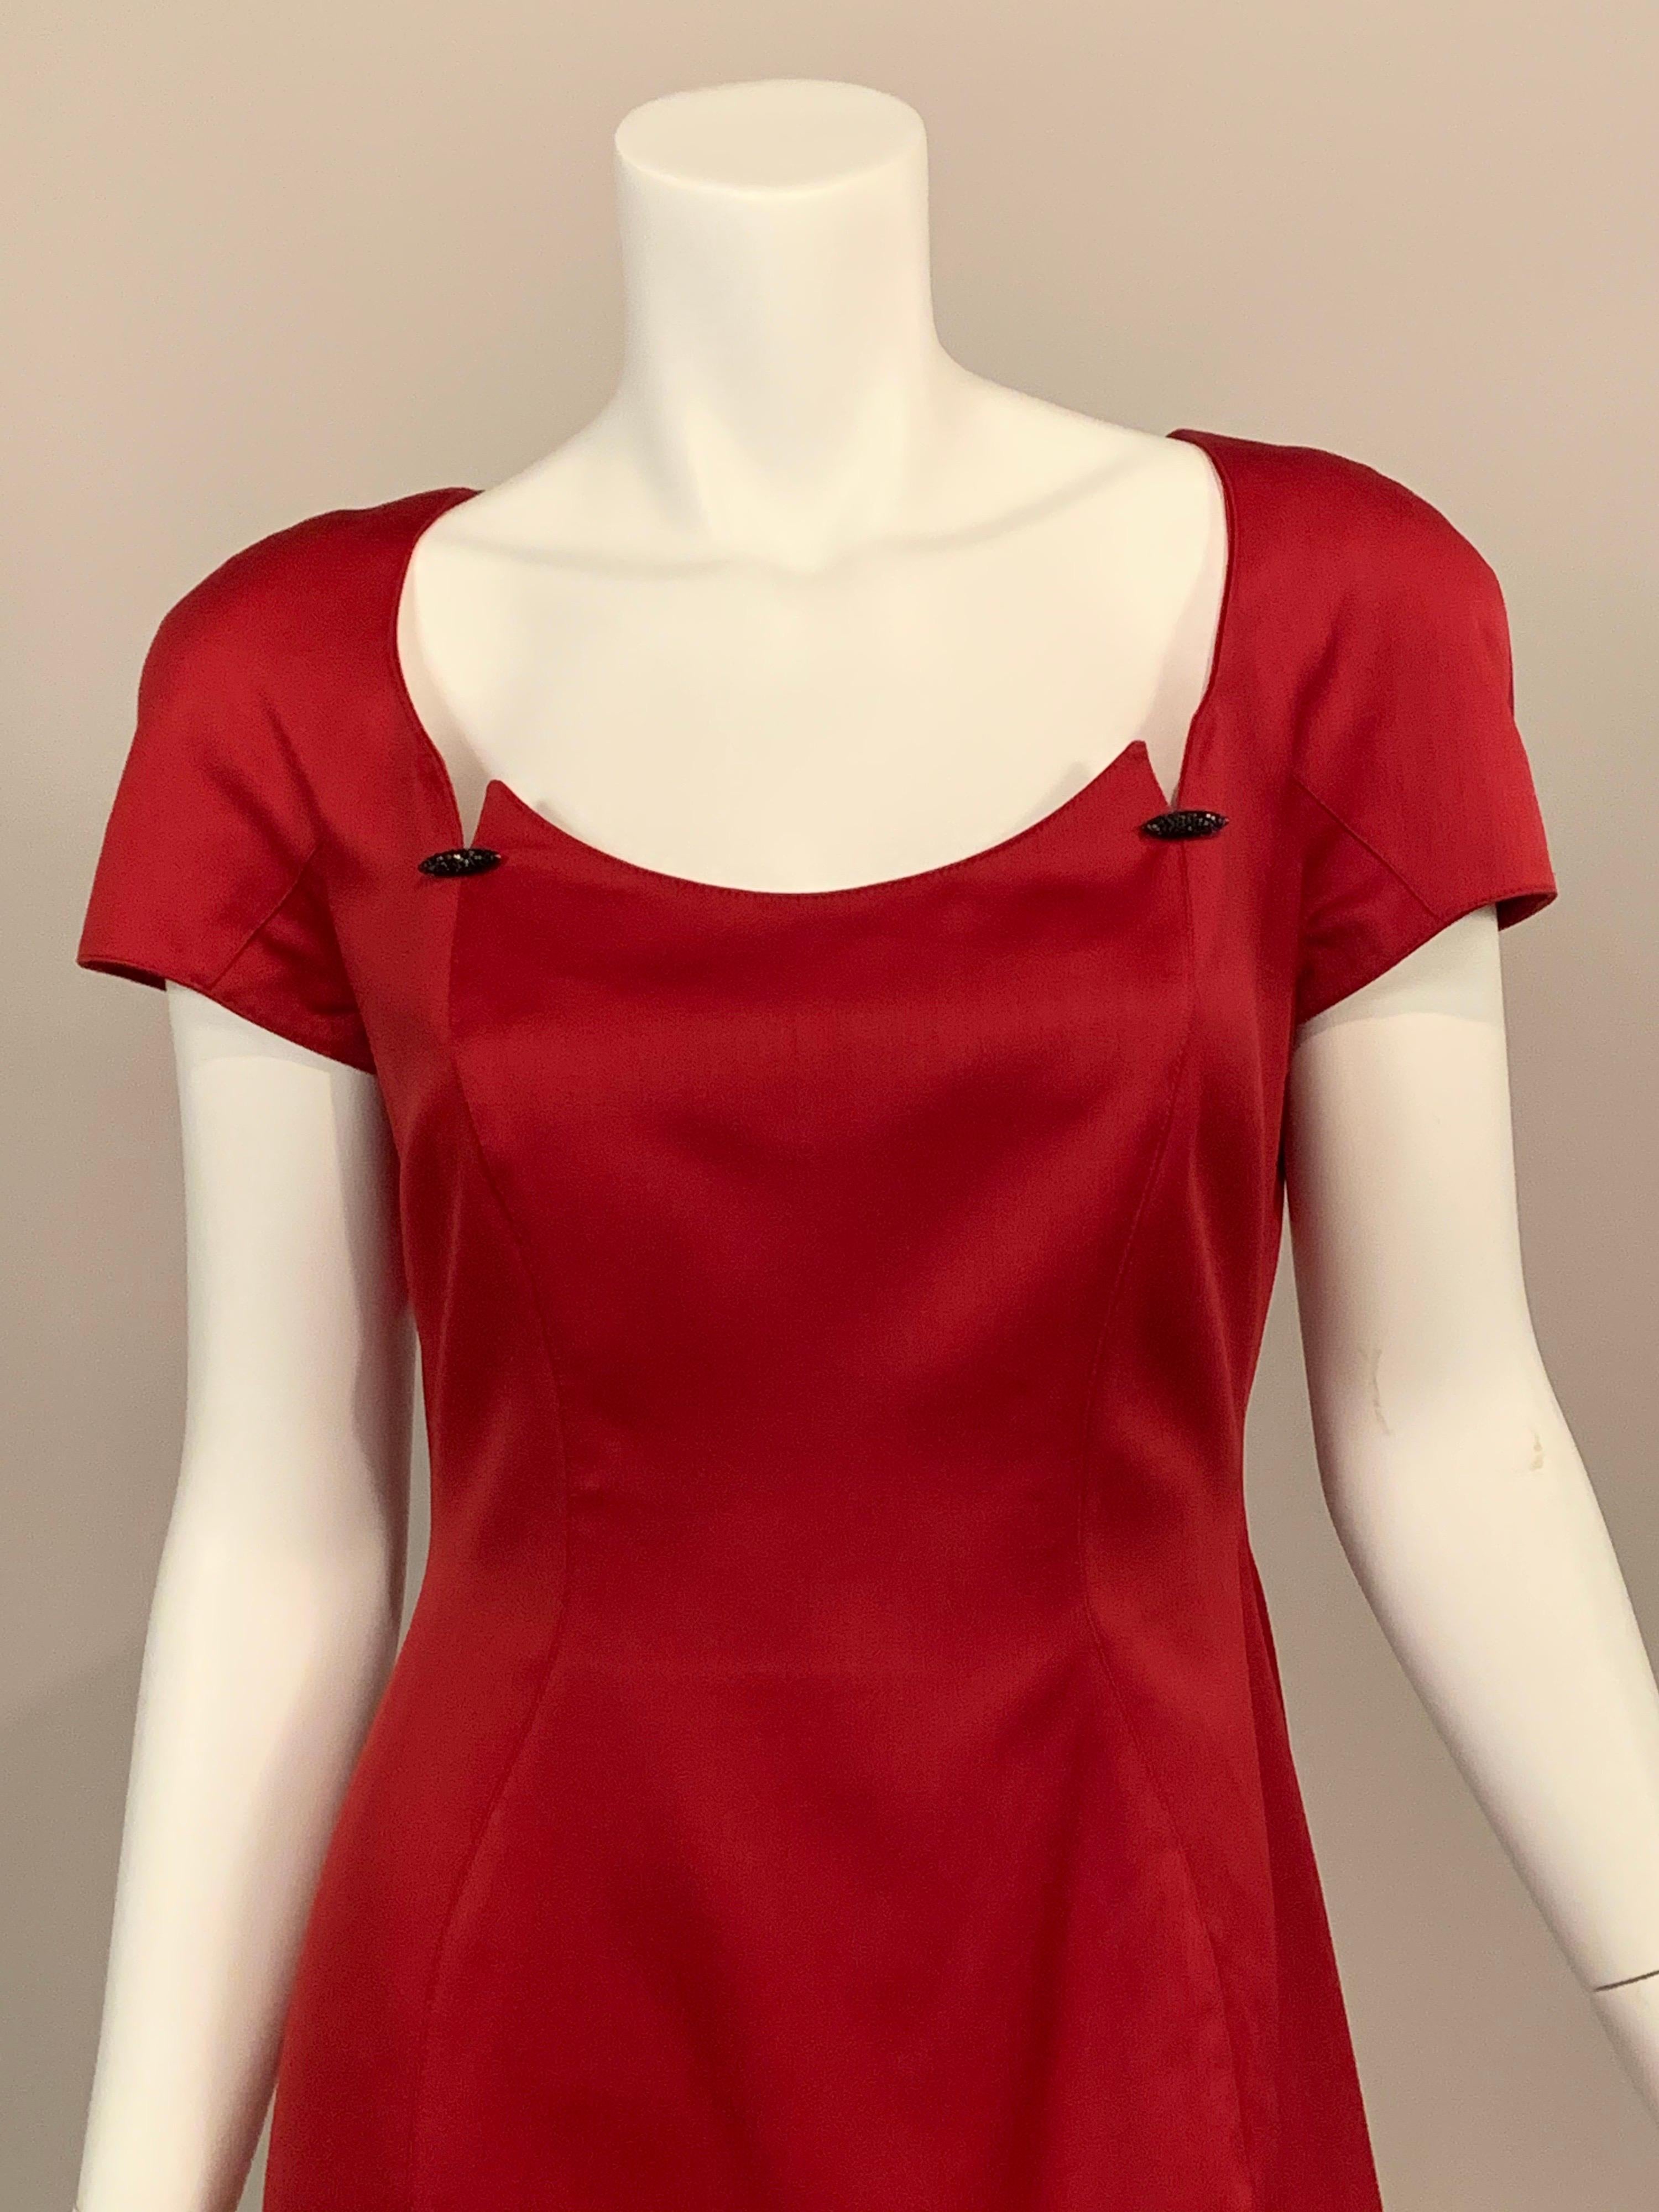 This deep red dress designed by Thierry Mugler has a low cut neckline with jeweled ornaments, cap sleeves and a center back invisible zipper.  It is fully lined in red, and marked a size 40. Retailed by Bergdorf Goodman it is in excellent